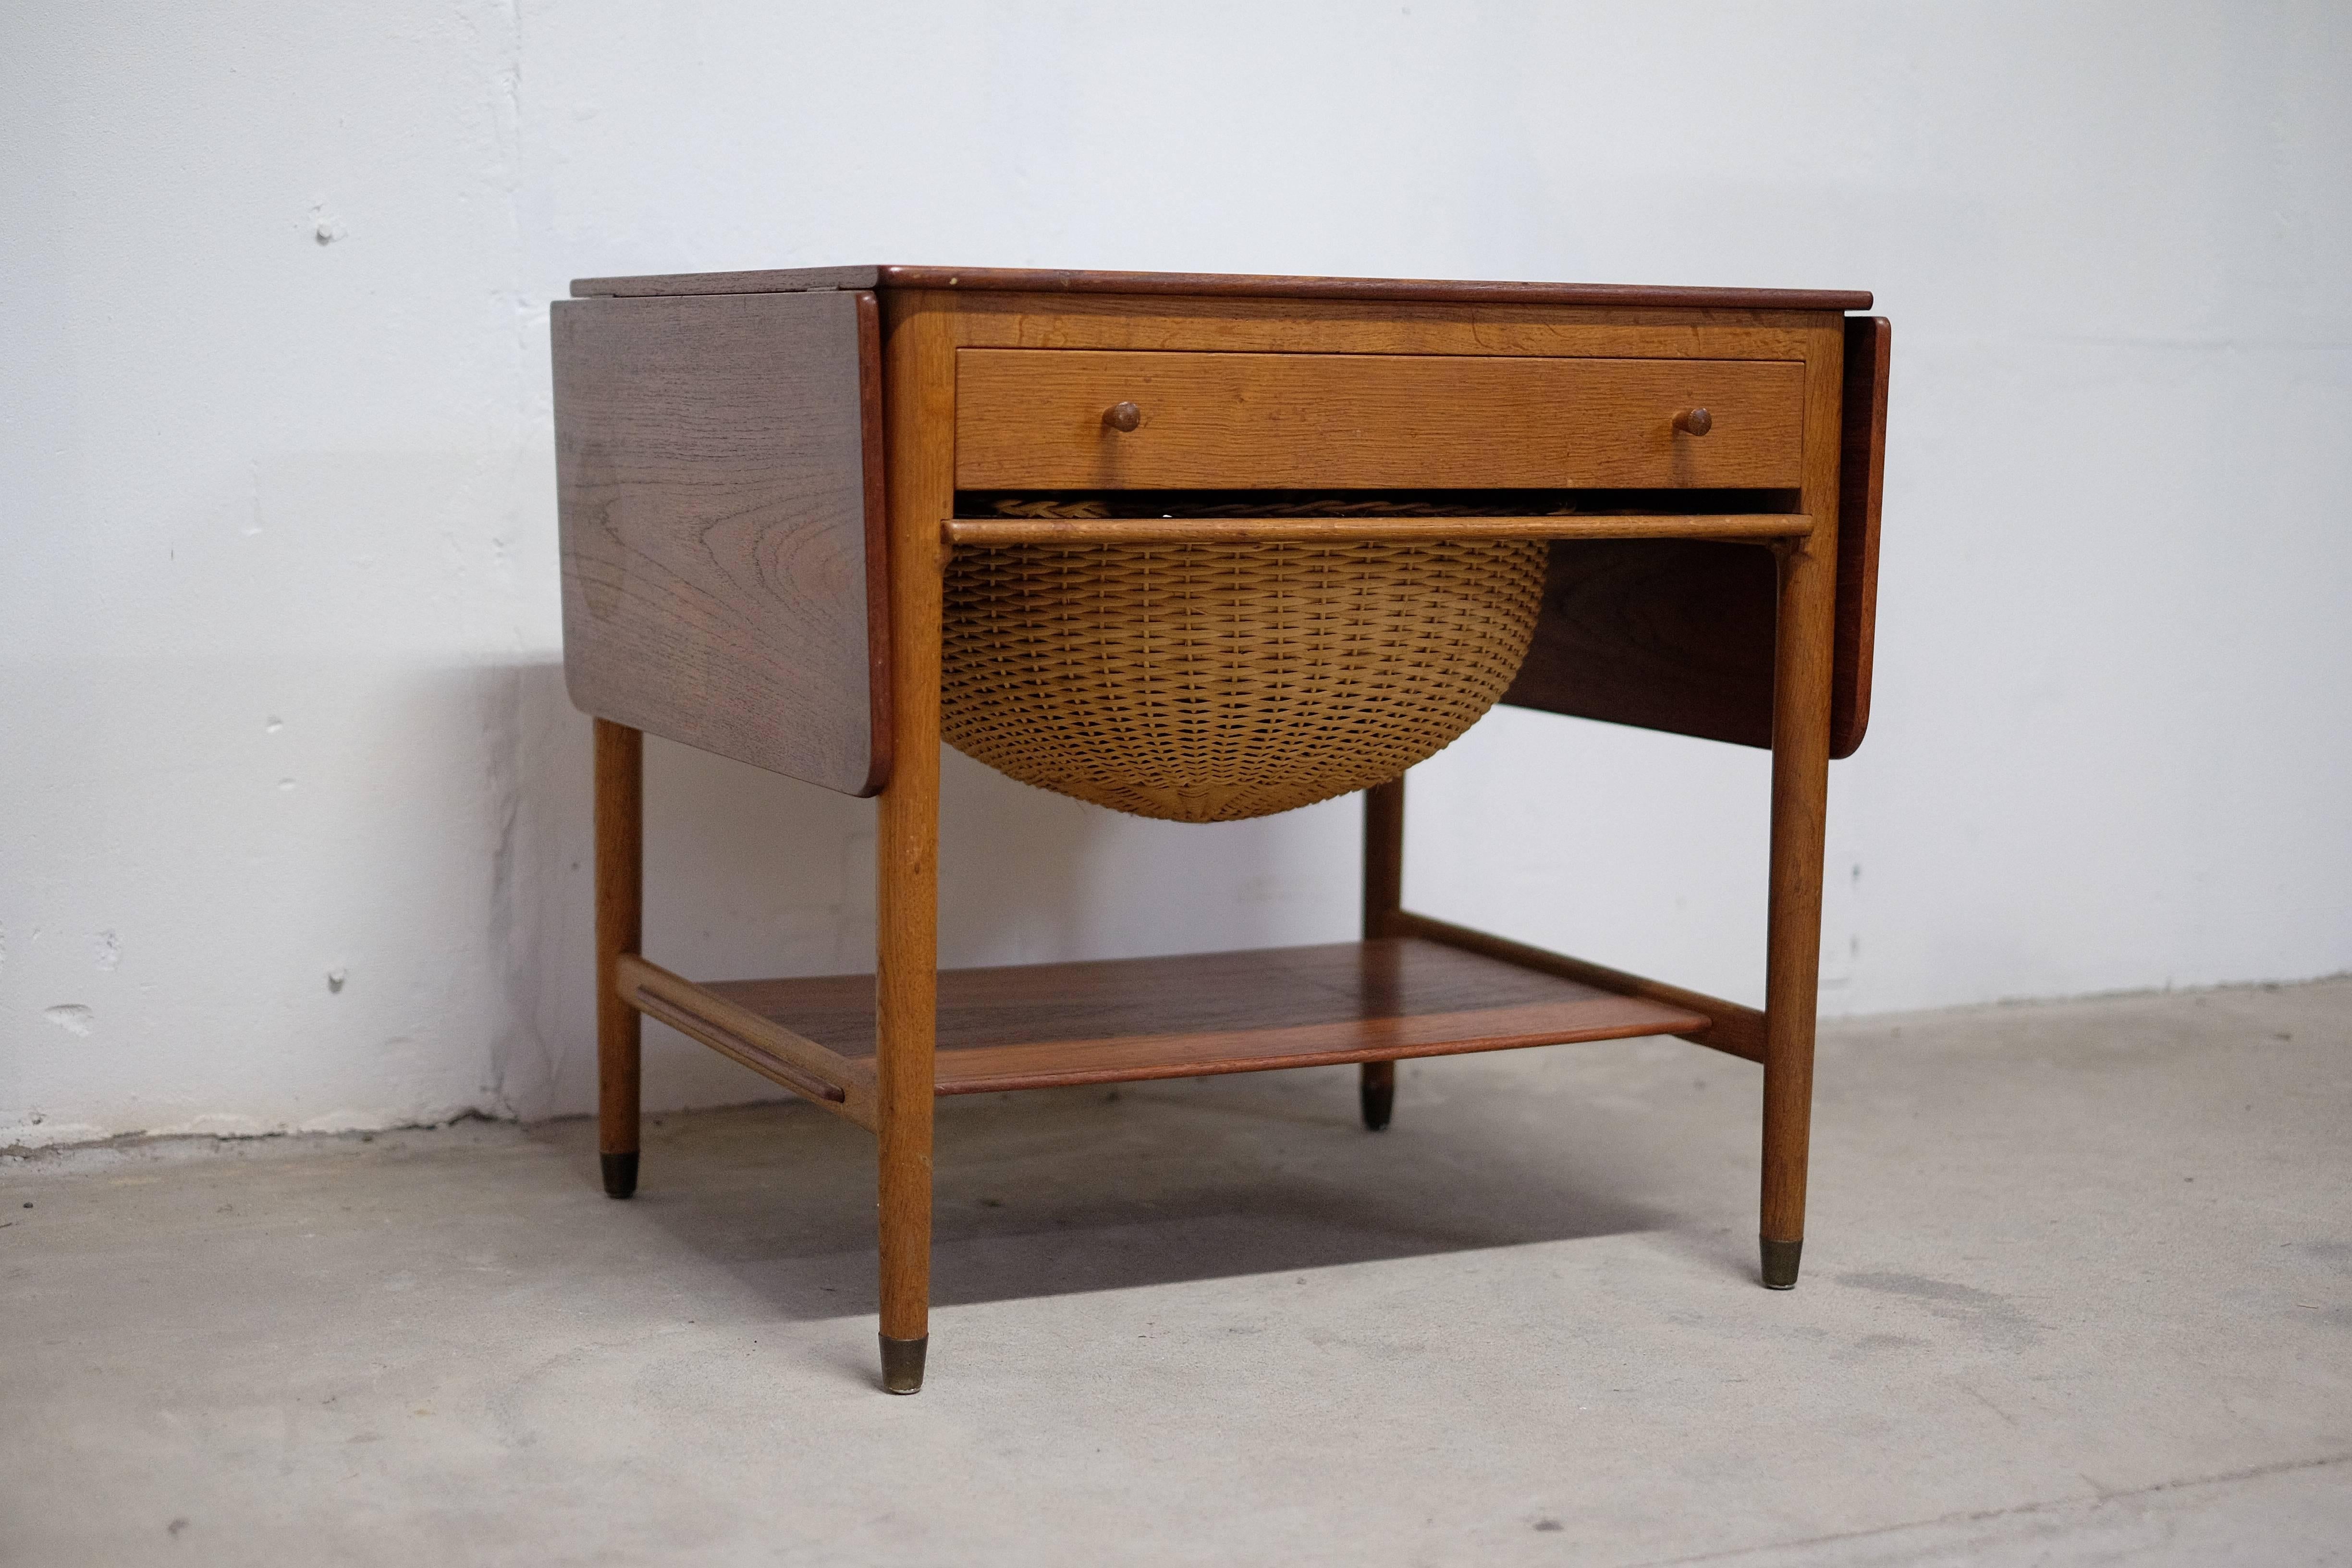 Hans J. Wegner sewing table. Model: AT-33. Design 1959. Solid teak and wicker.

The table is in good condition with few traces of age-related use. It has a spot on top.
If you like to receive the table, sanded, polished and shined up to look as